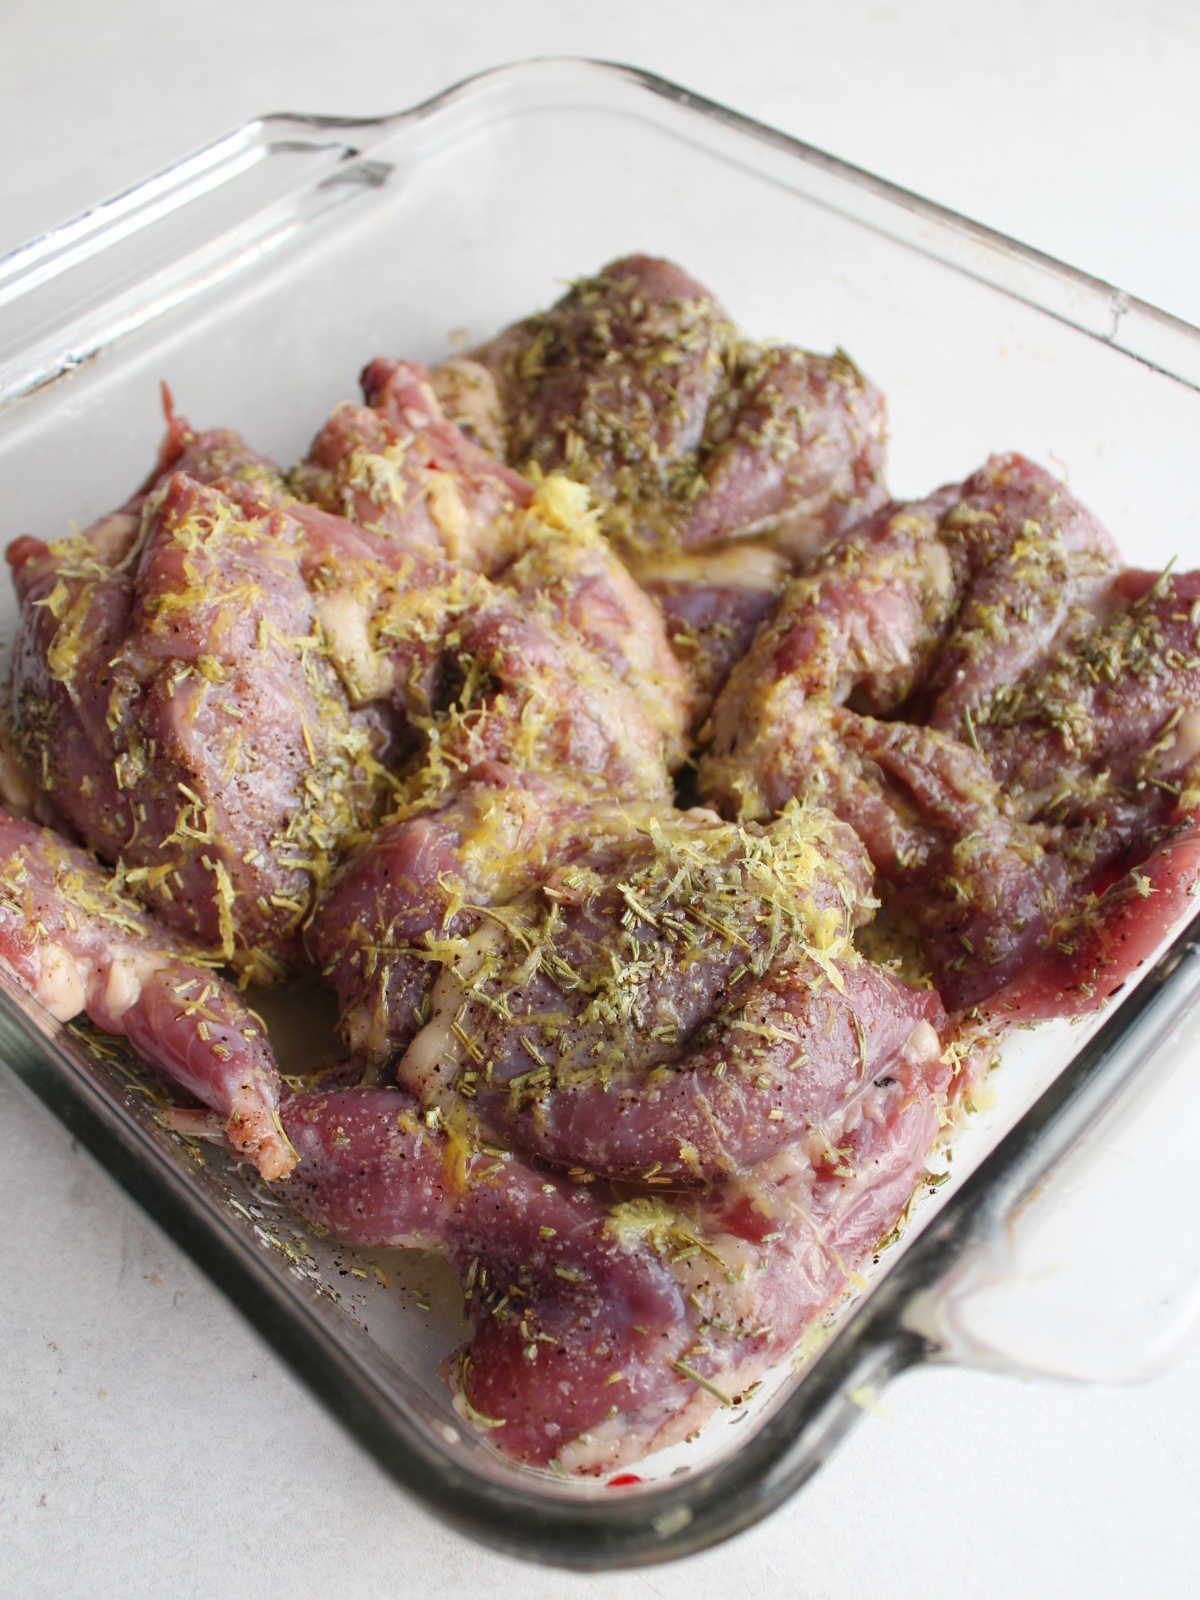 Baking dish filled with raw quail coated in lemon and rosemary marinade mixture.